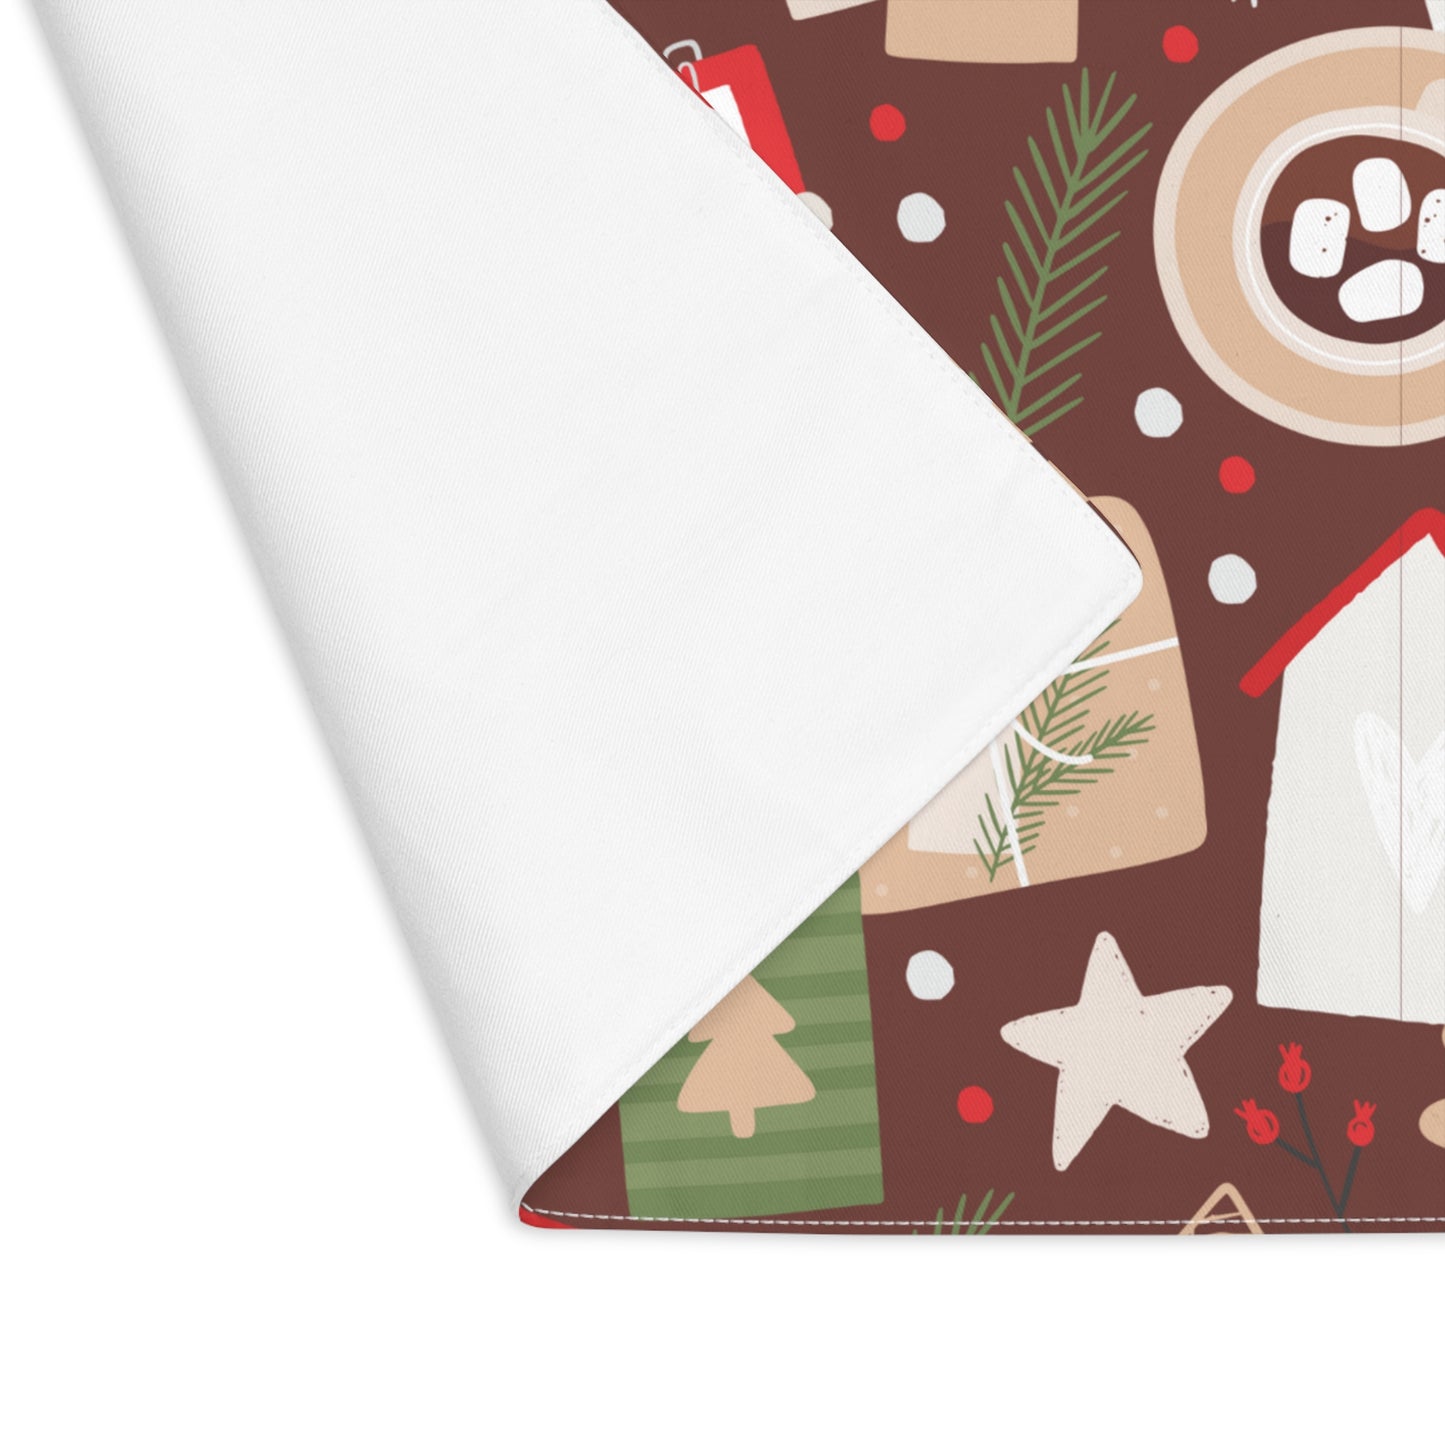 Cards Cocoa and Presents Christmas Placemat, 1pc